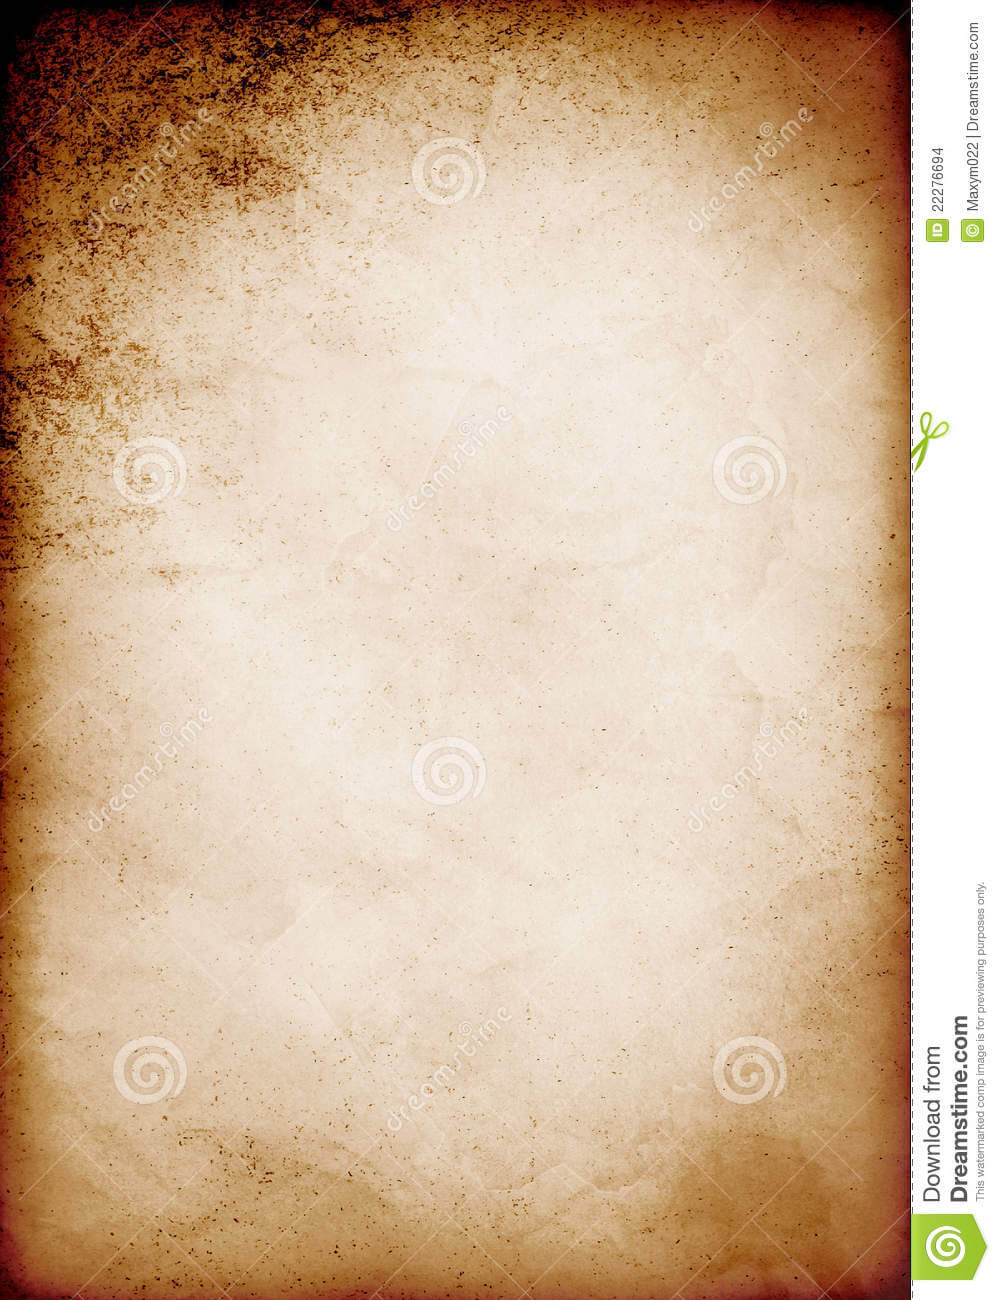 20 Old Paper Template For Word Images – Old Scroll Paper Regarding Blank Old Newspaper Template